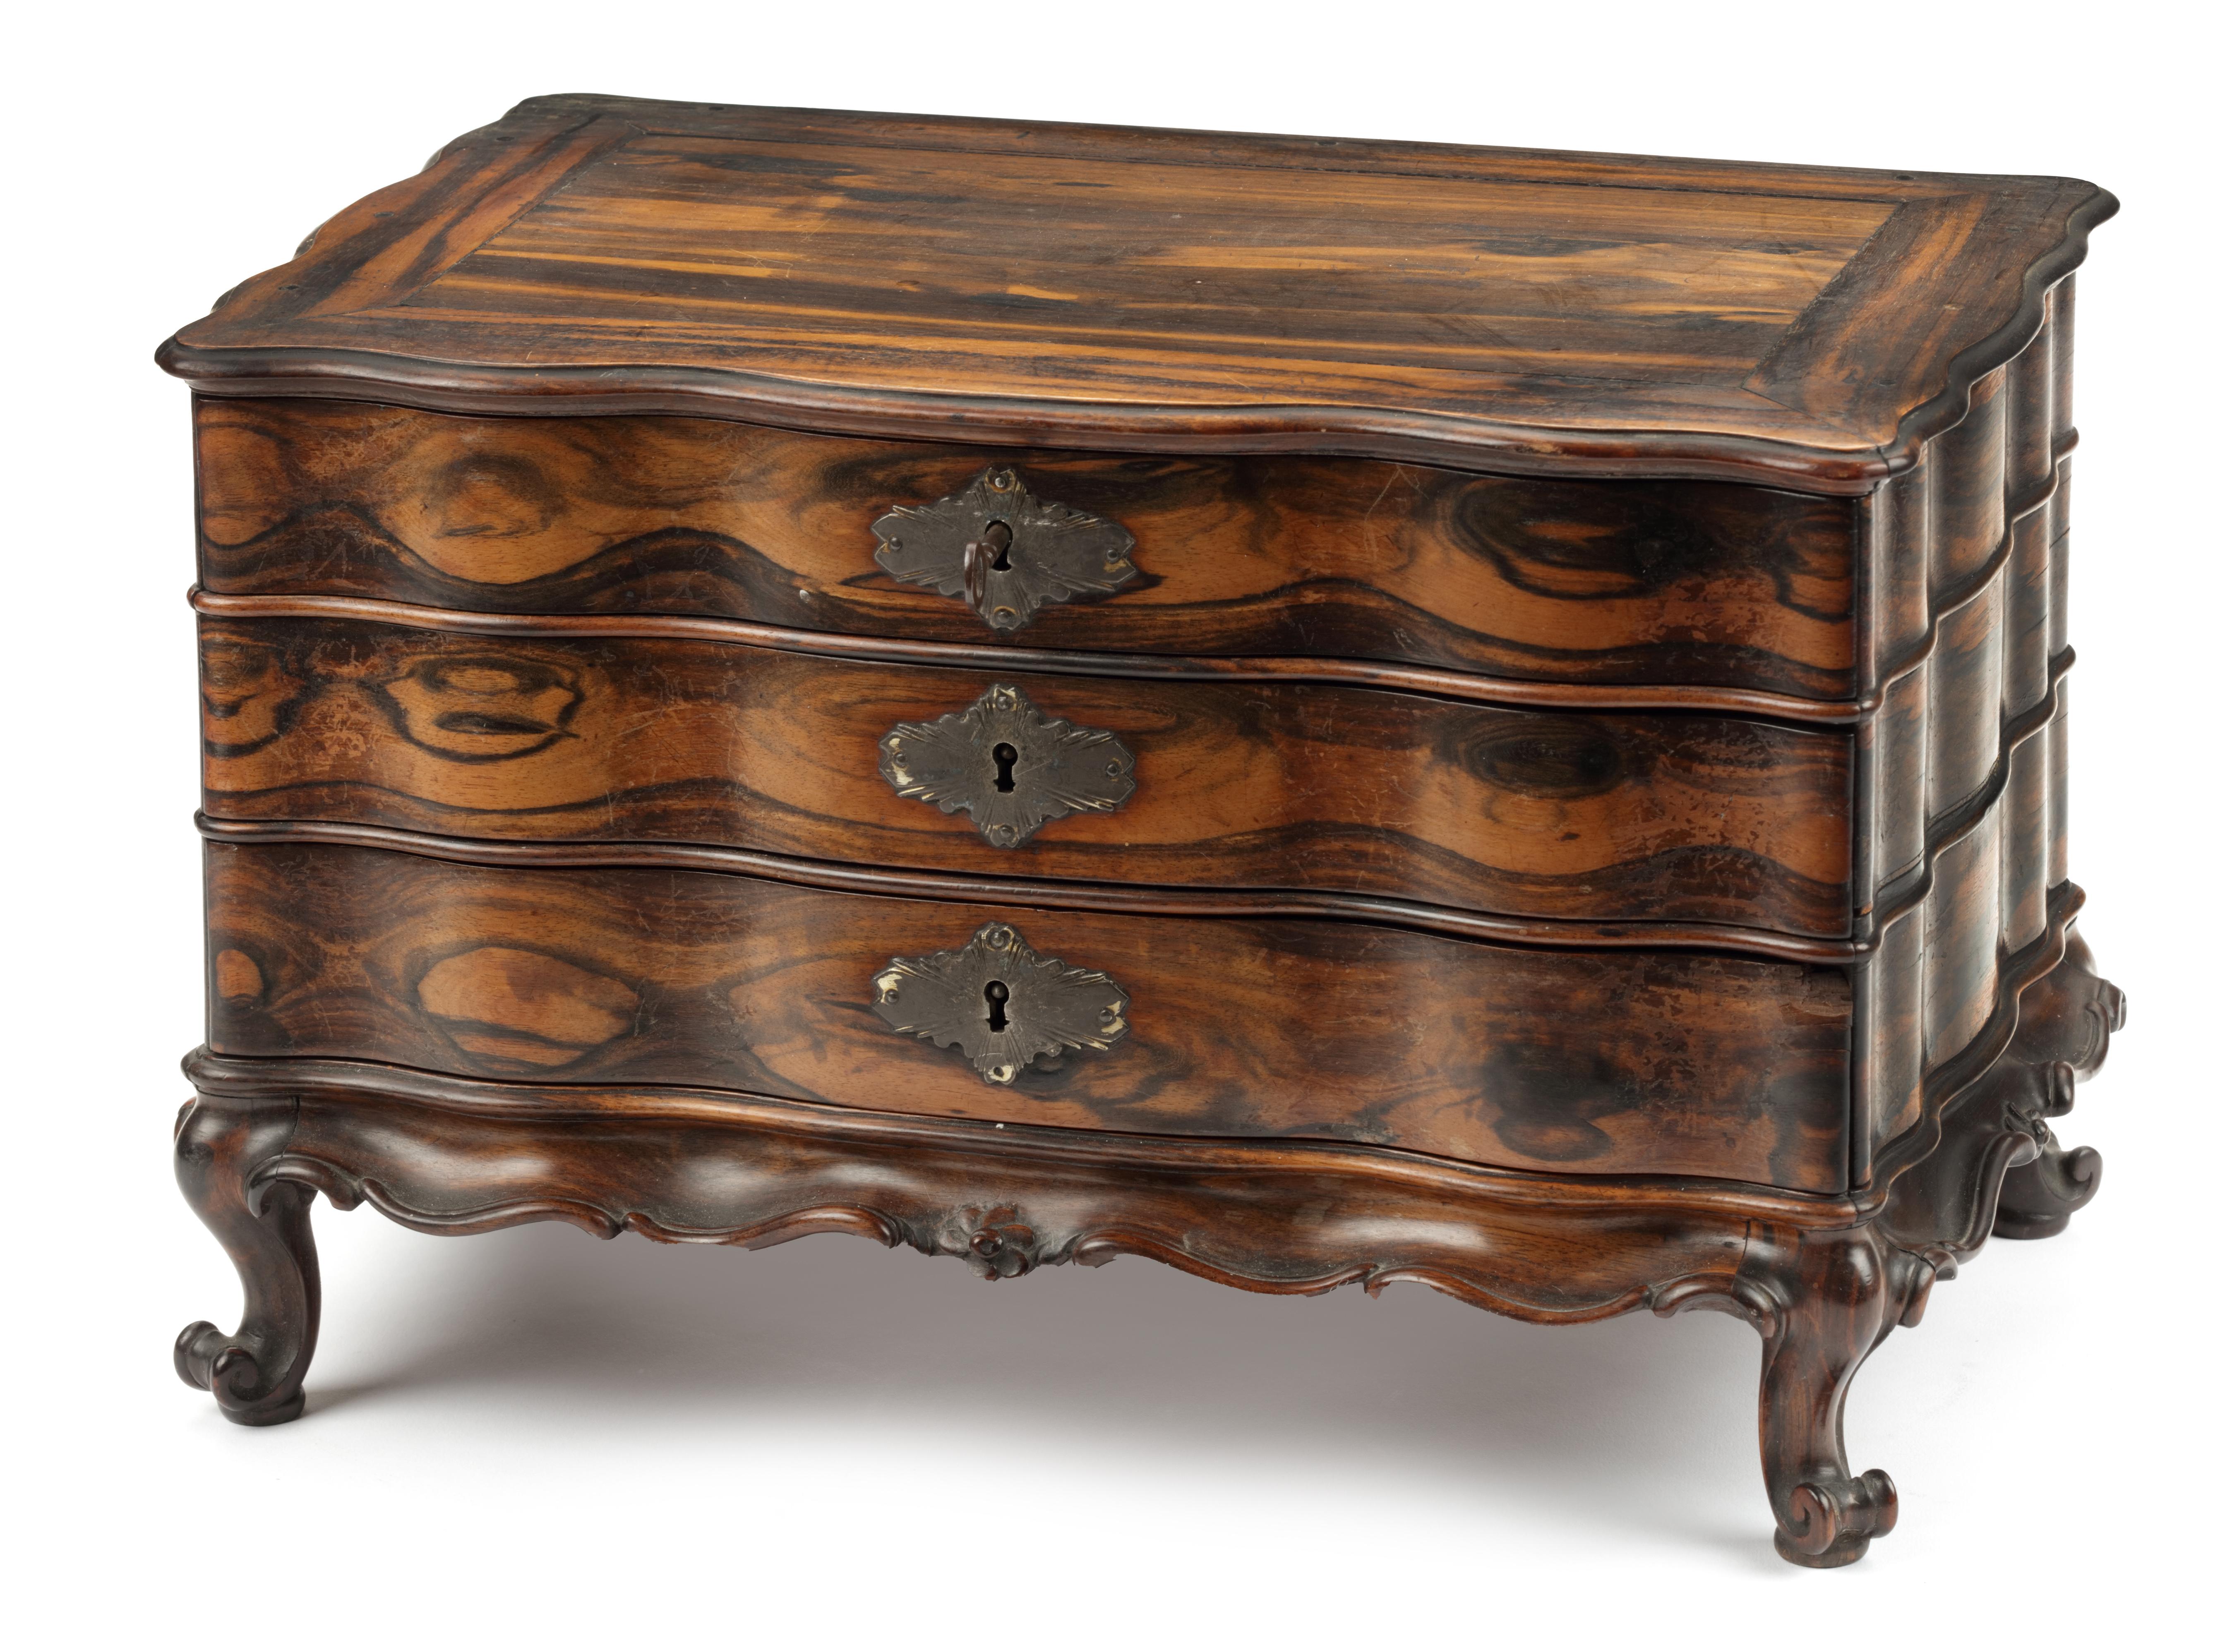 Miniature chest-of-drawers 

Sri Lanka, late 18th-early 19th century.

Calamander wood, Indian rosewood and palm wood, silver escutcheon, and English locks.

Measures: Height 23.3 cm., width 36.4 cm., depth 23.5 cm.

This chest-of-drawers